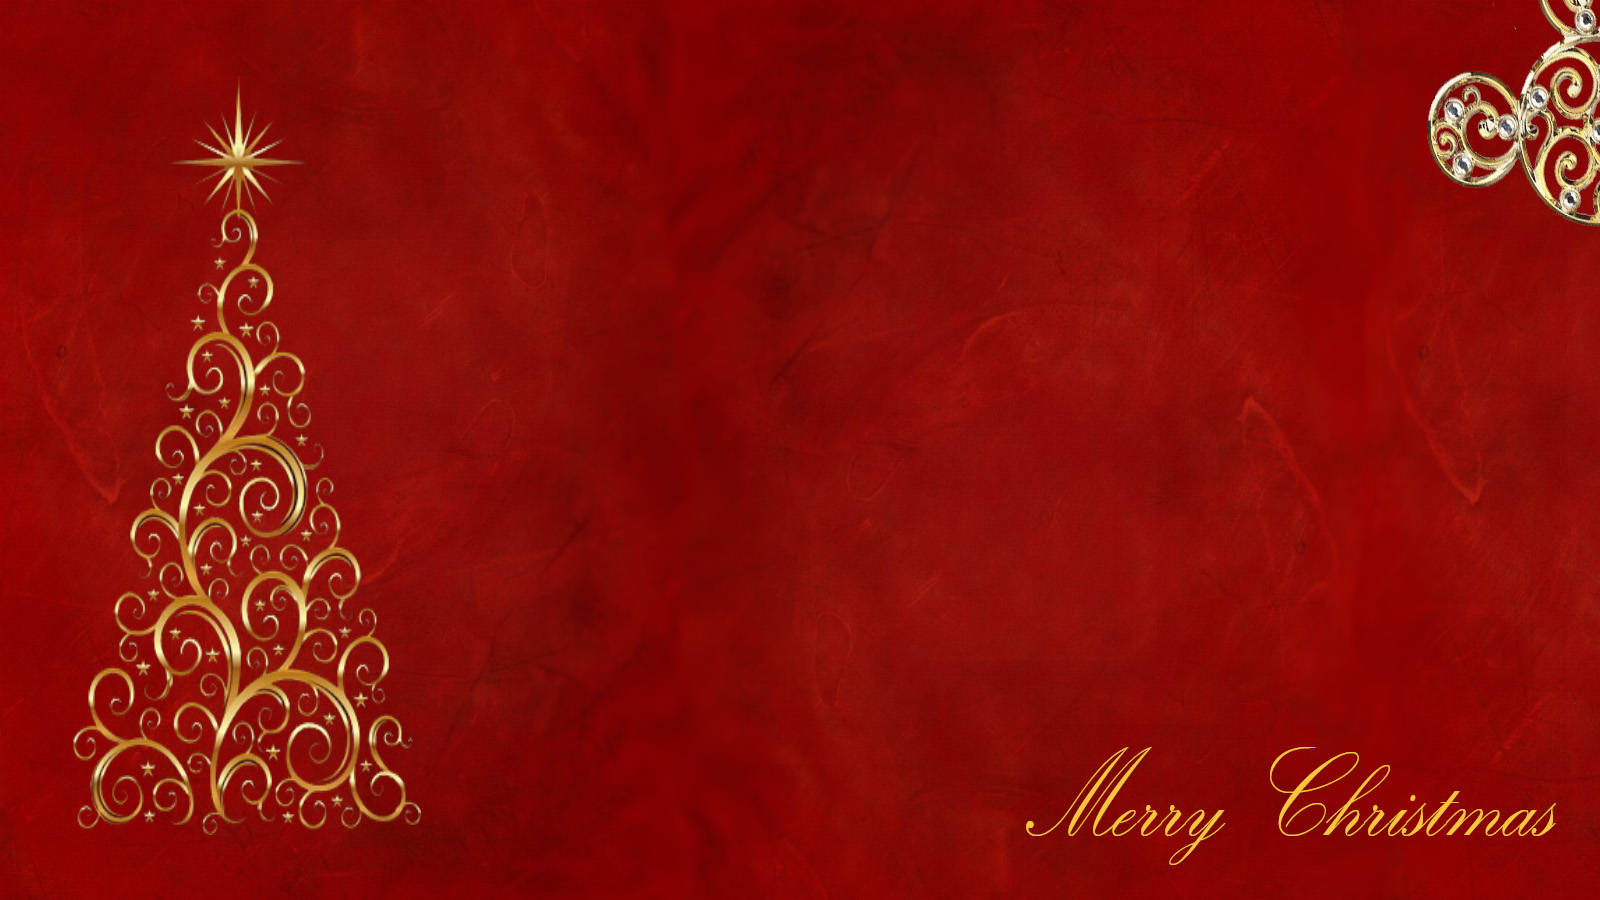 Gold With Red Christmas Background Wallpaper